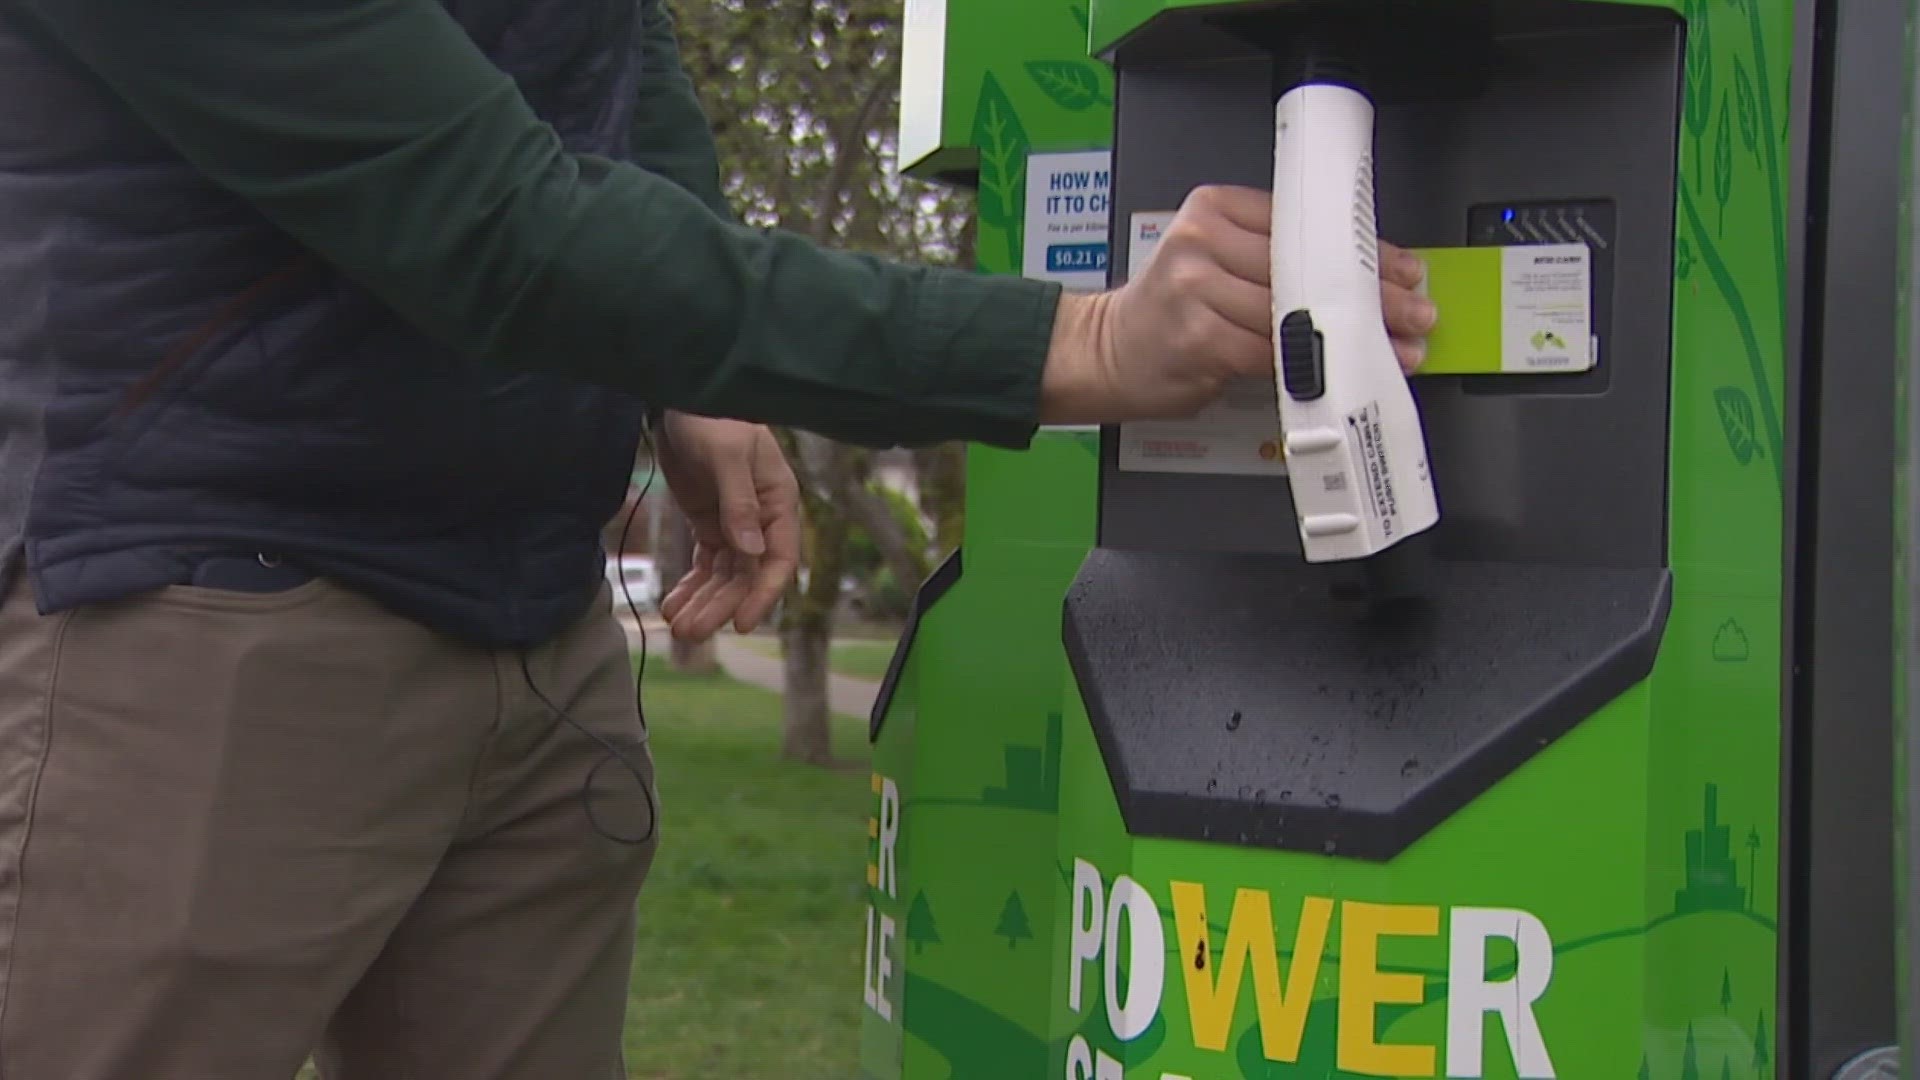 EV charging infrastructure is getting a welcome boost in the Seattle area in the form of 31 new curbside charging stations across the city.